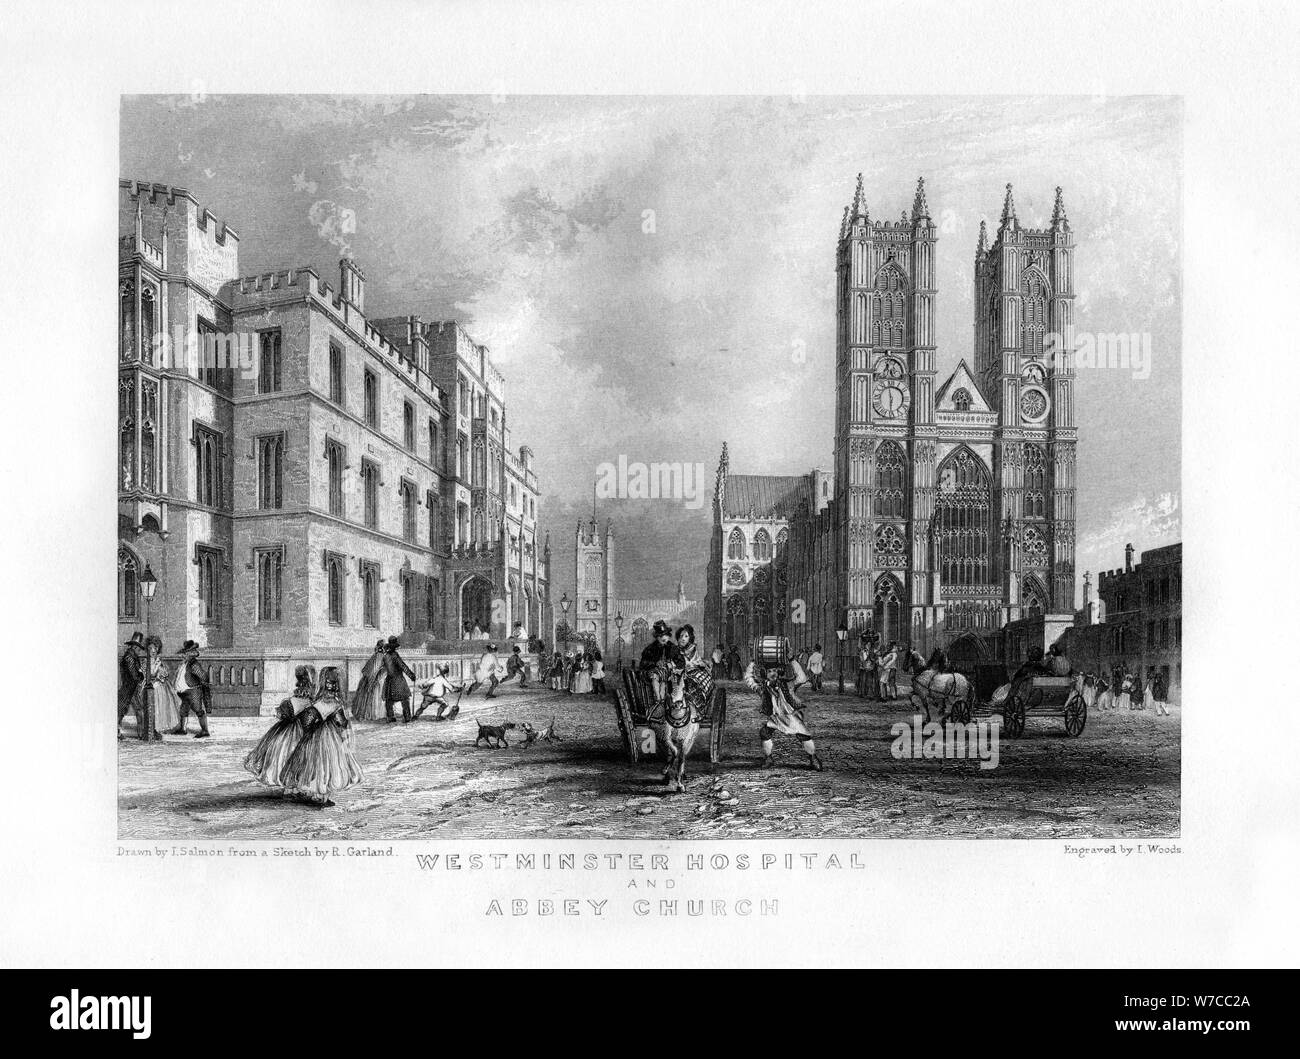 'Westminster Hospital and Abbey Church', London, 19th century.Artist: J Woods Stock Photo